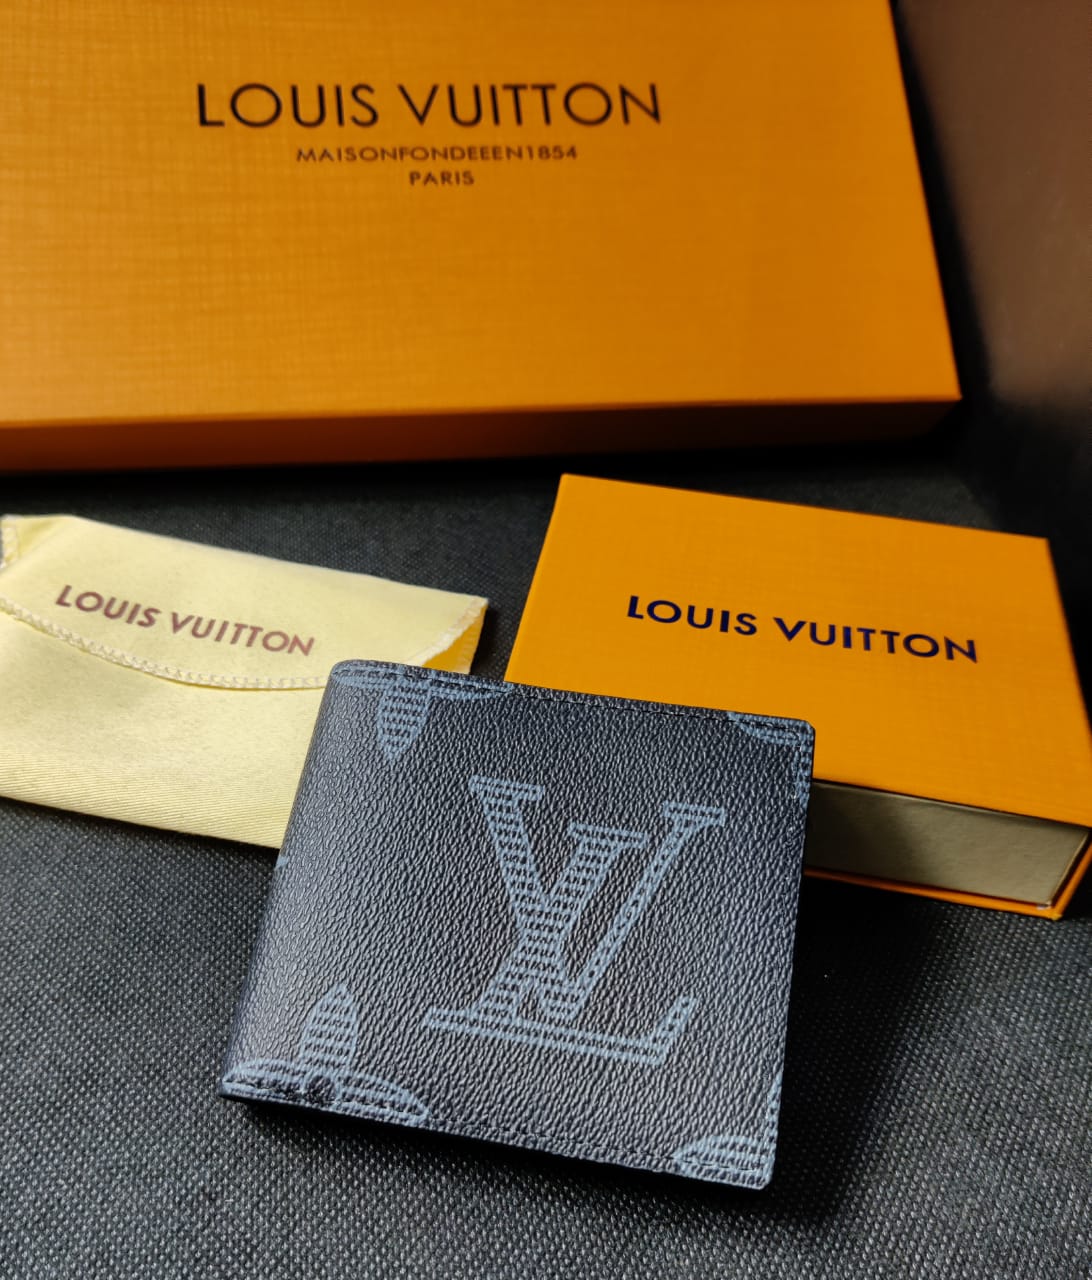 Louis Vuitton Leather Heavy quality latest full printed design Fancy look wallet for men's LV-709